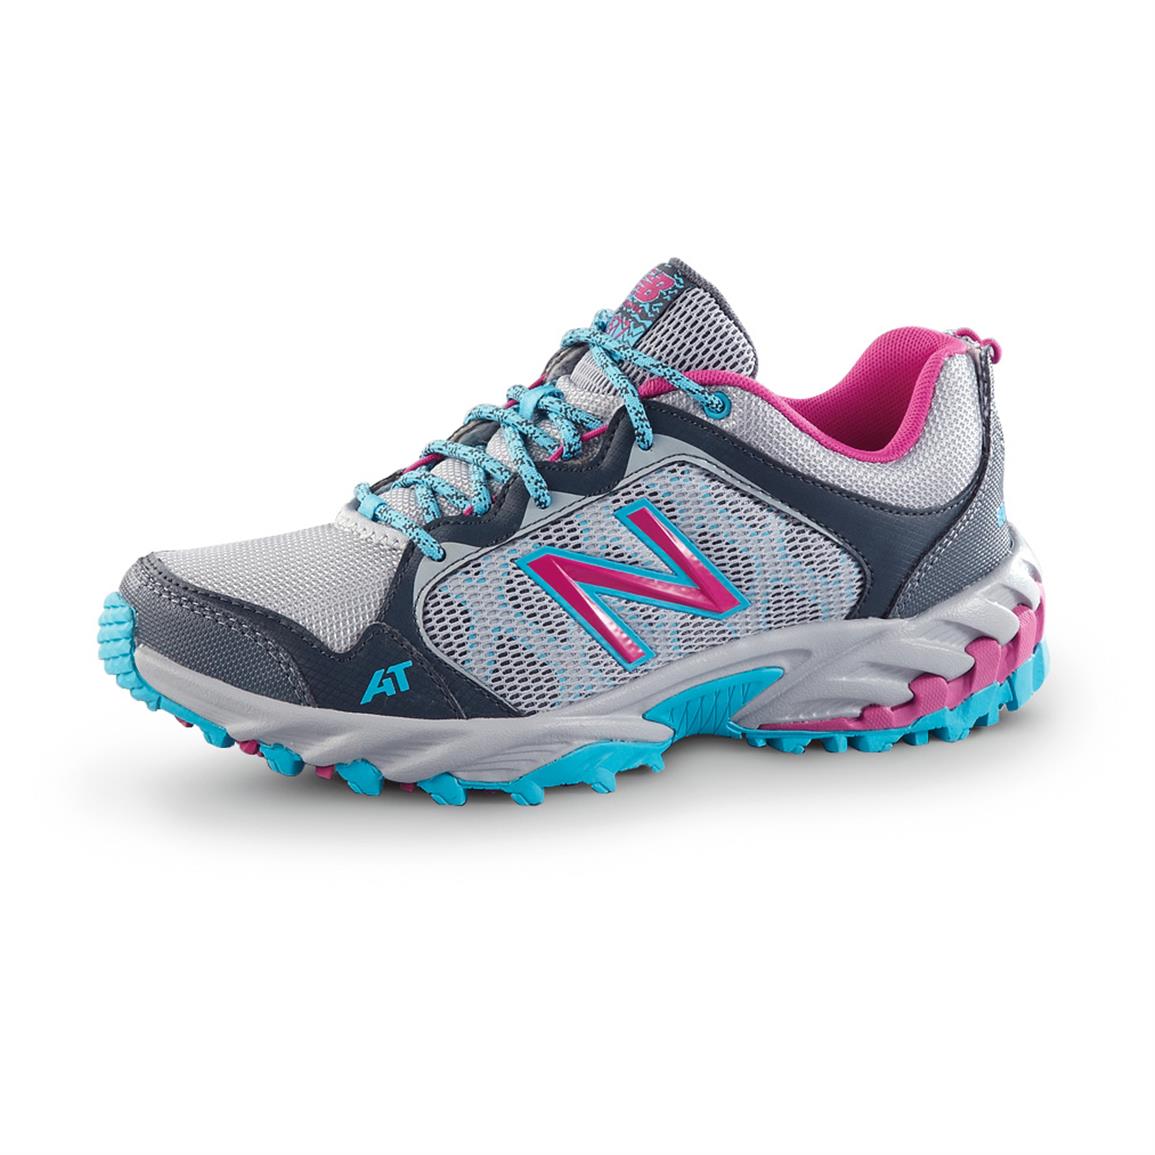 Women's New Balance WTE612 Trail Running Shoes - 641054, Running Shoes ...